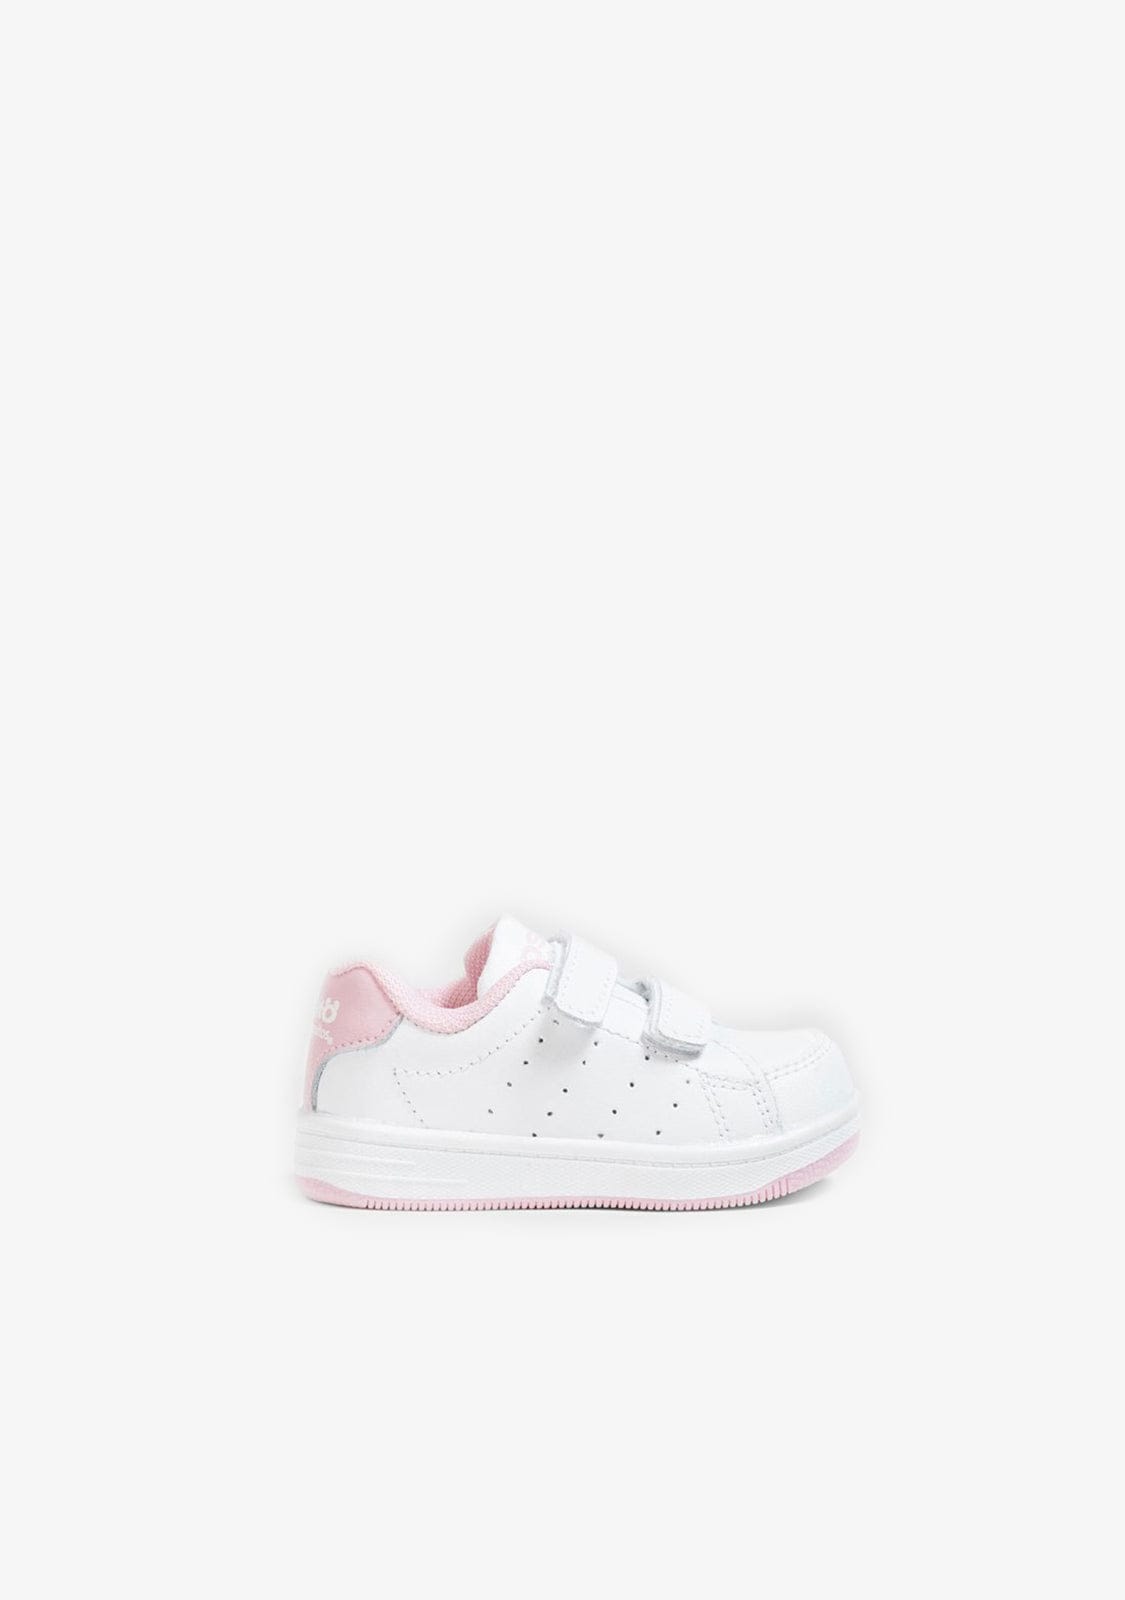 OSITO Shoes Babies Pink Washable Leather Trainers